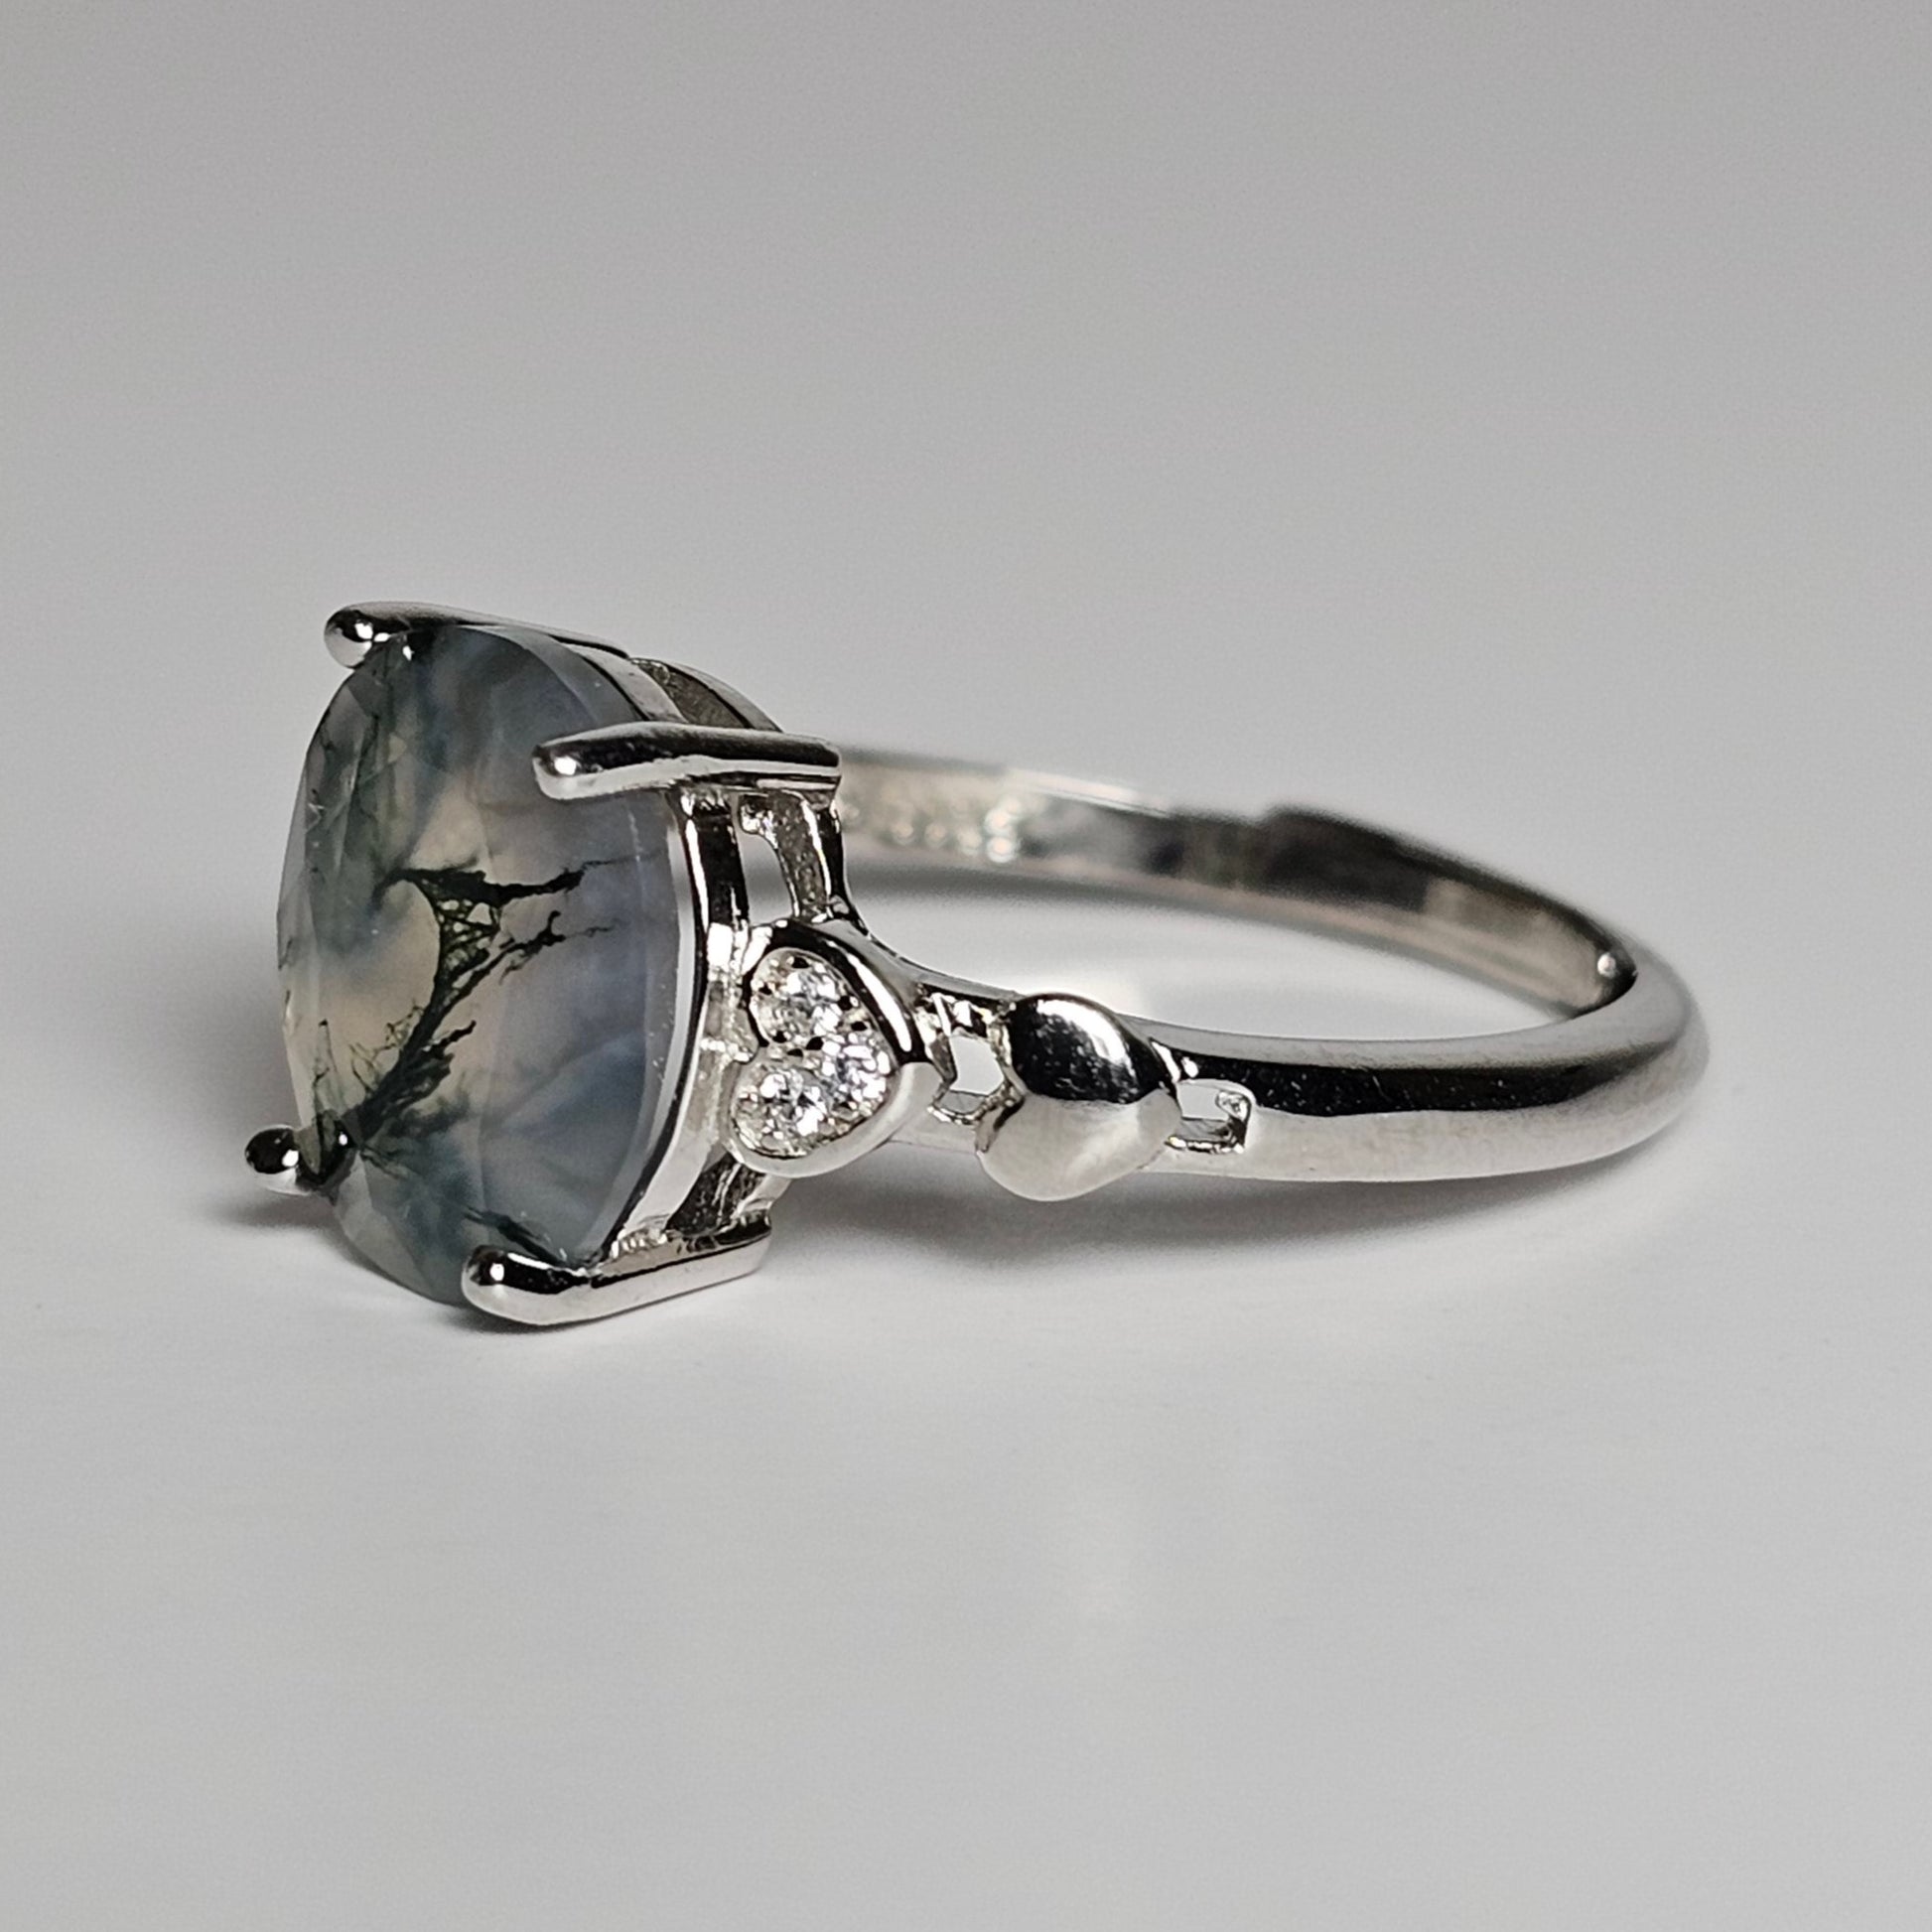 This adjustable ring is crafted from sterling silver and features a stunning oval shaped Moss Agate stone with zircon and heart designed shoulders.